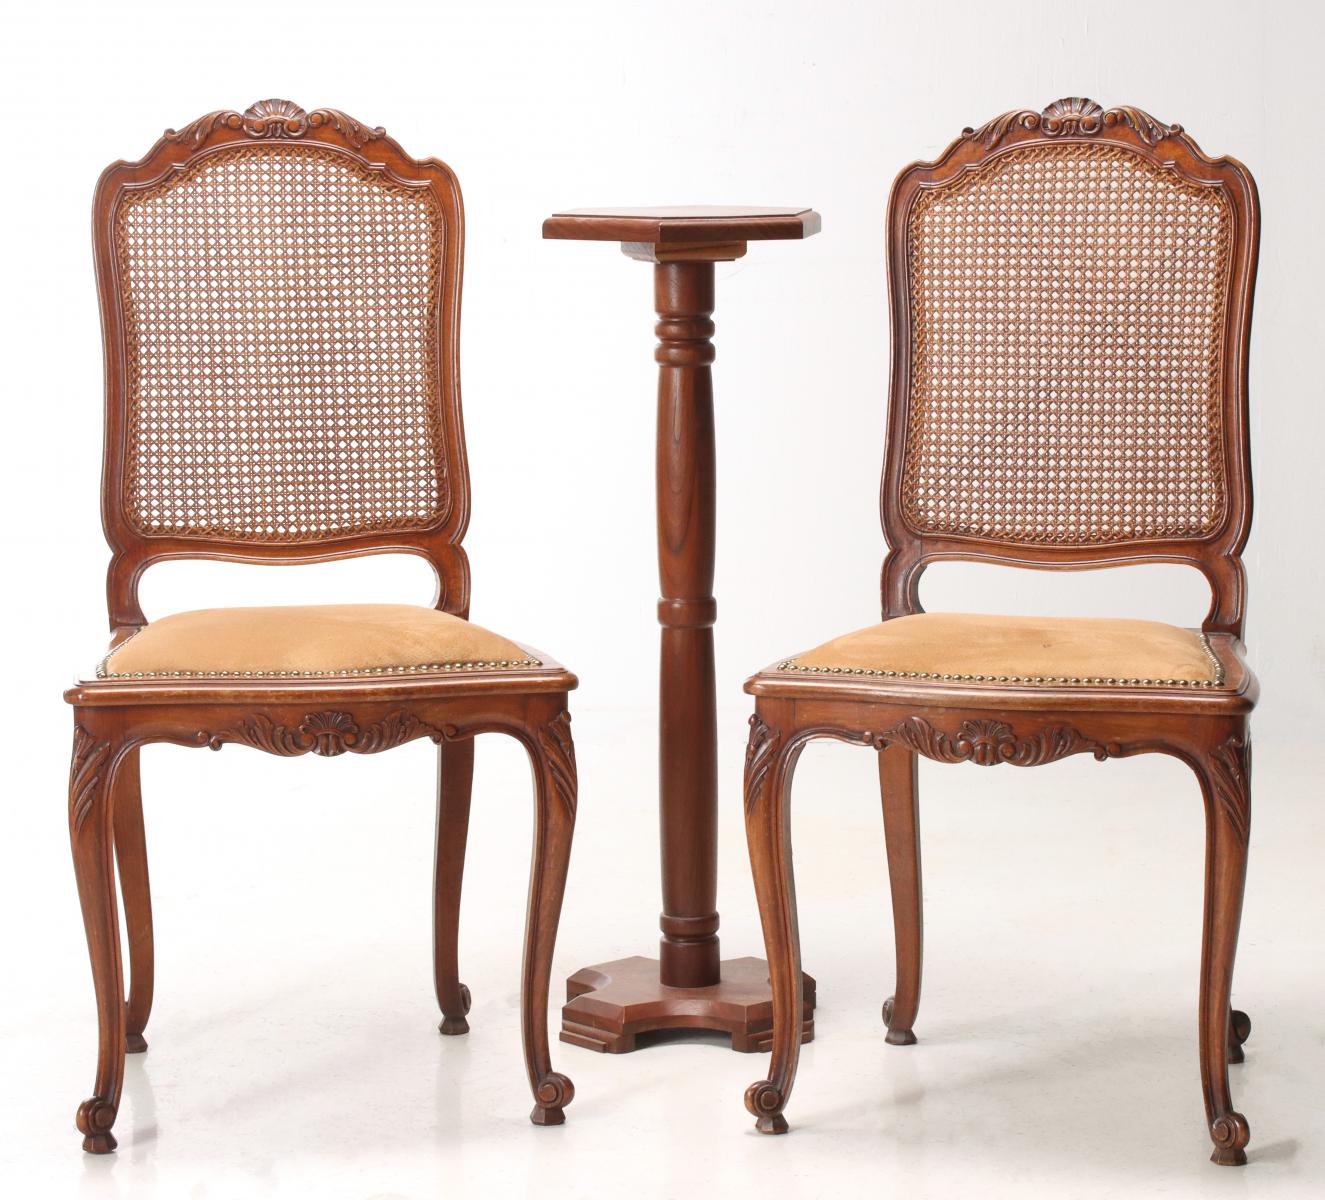 TWO 20TH CENTURY COUNTRY FRENCH CANE BACK CHAIRS